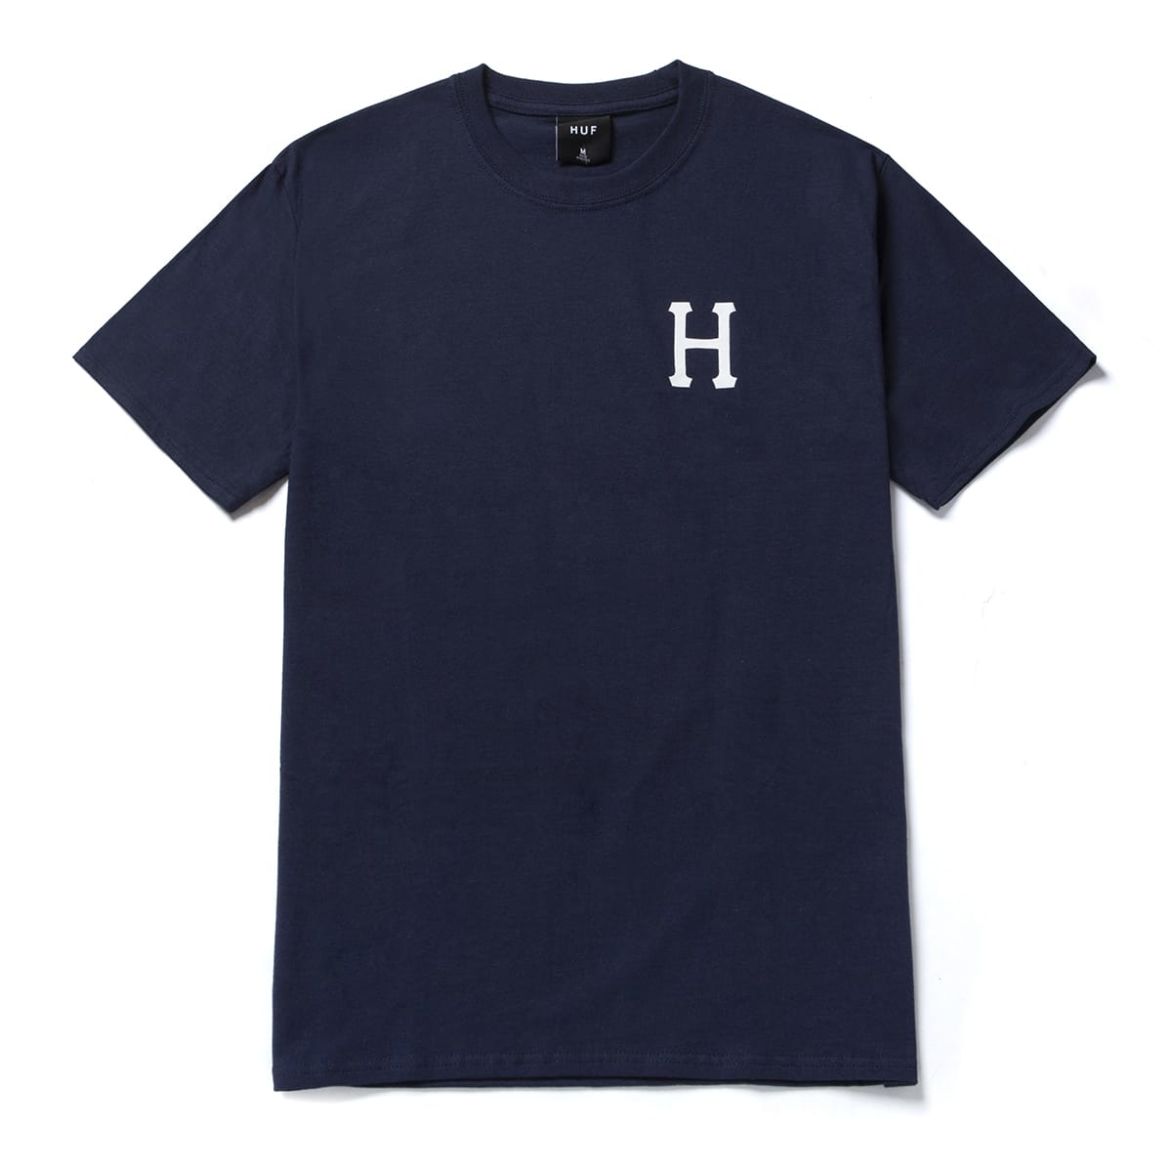 HUF - Global Trip Classic H Men's Tee, French Navy